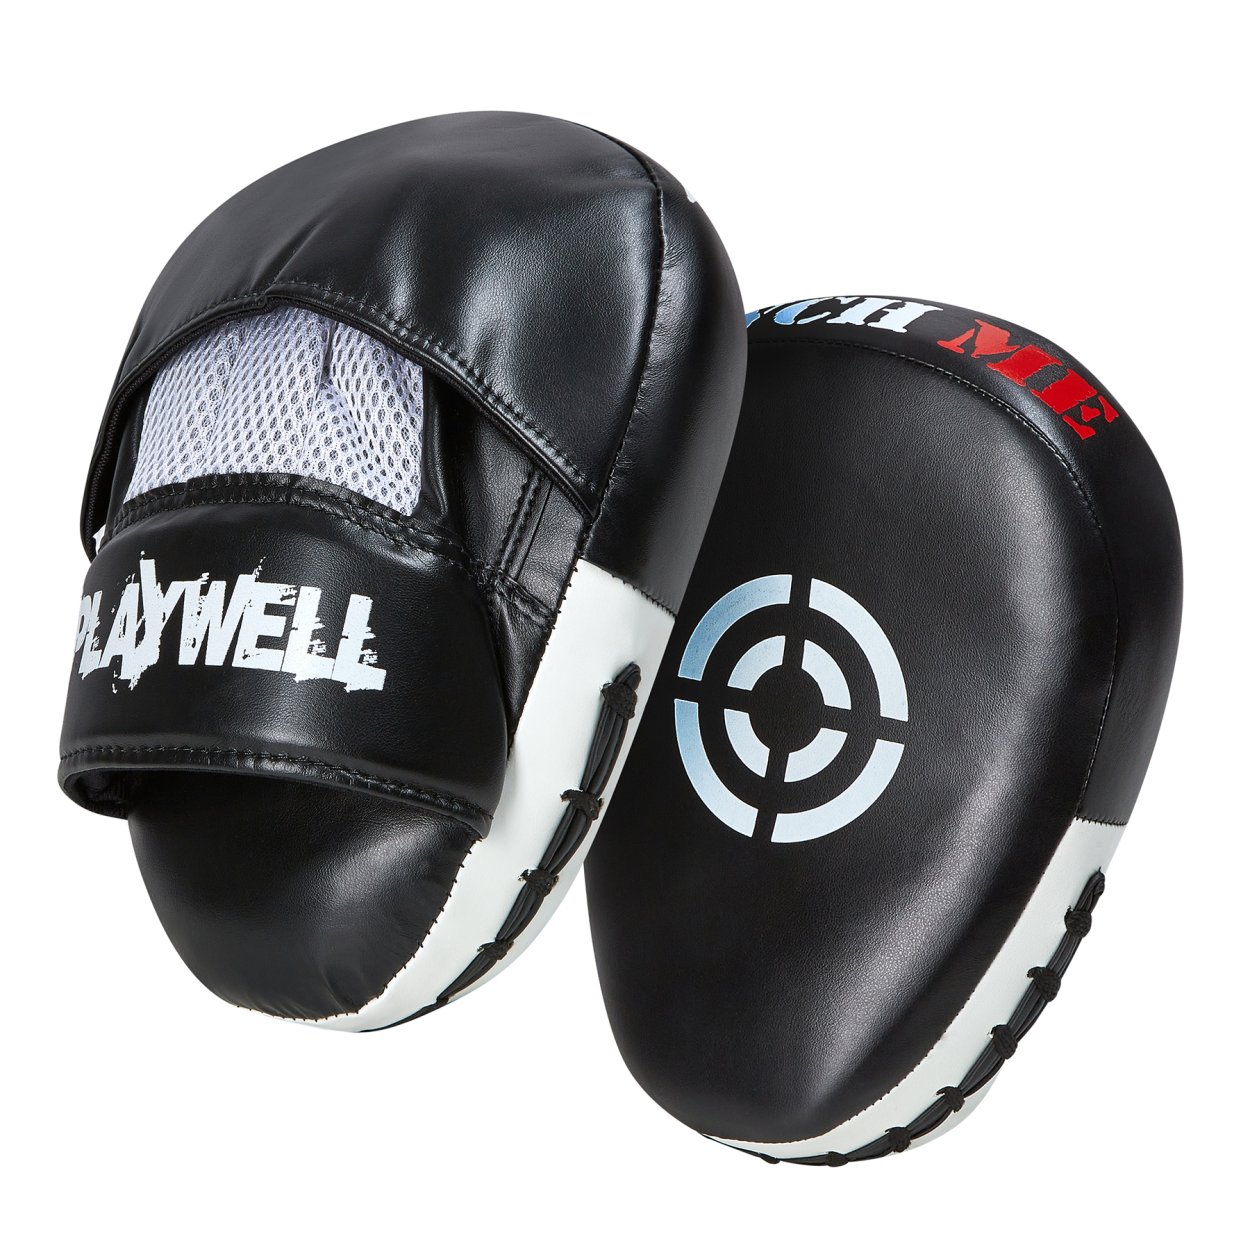 Boxing/MMA Curved Target Focus Pads - Click Image to Close